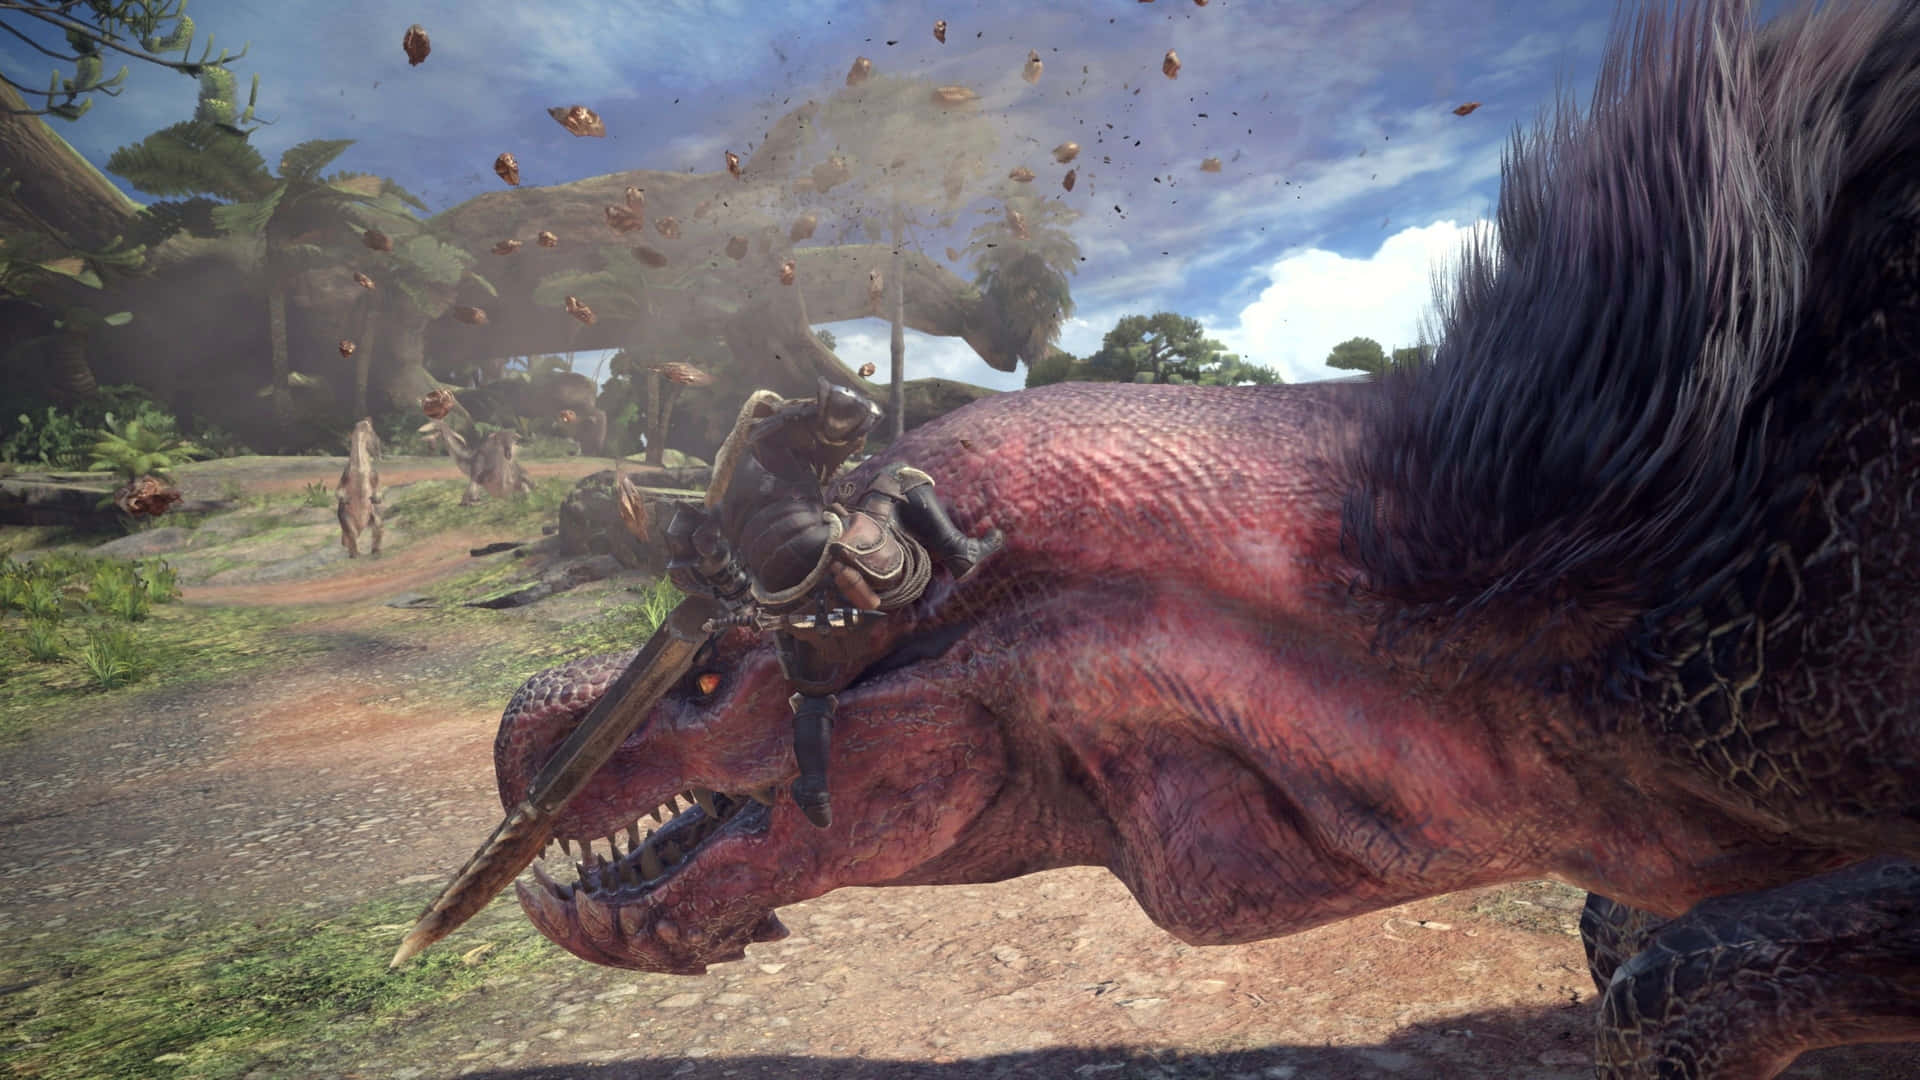 The energetic and inviting world of HD Monster Hunter World